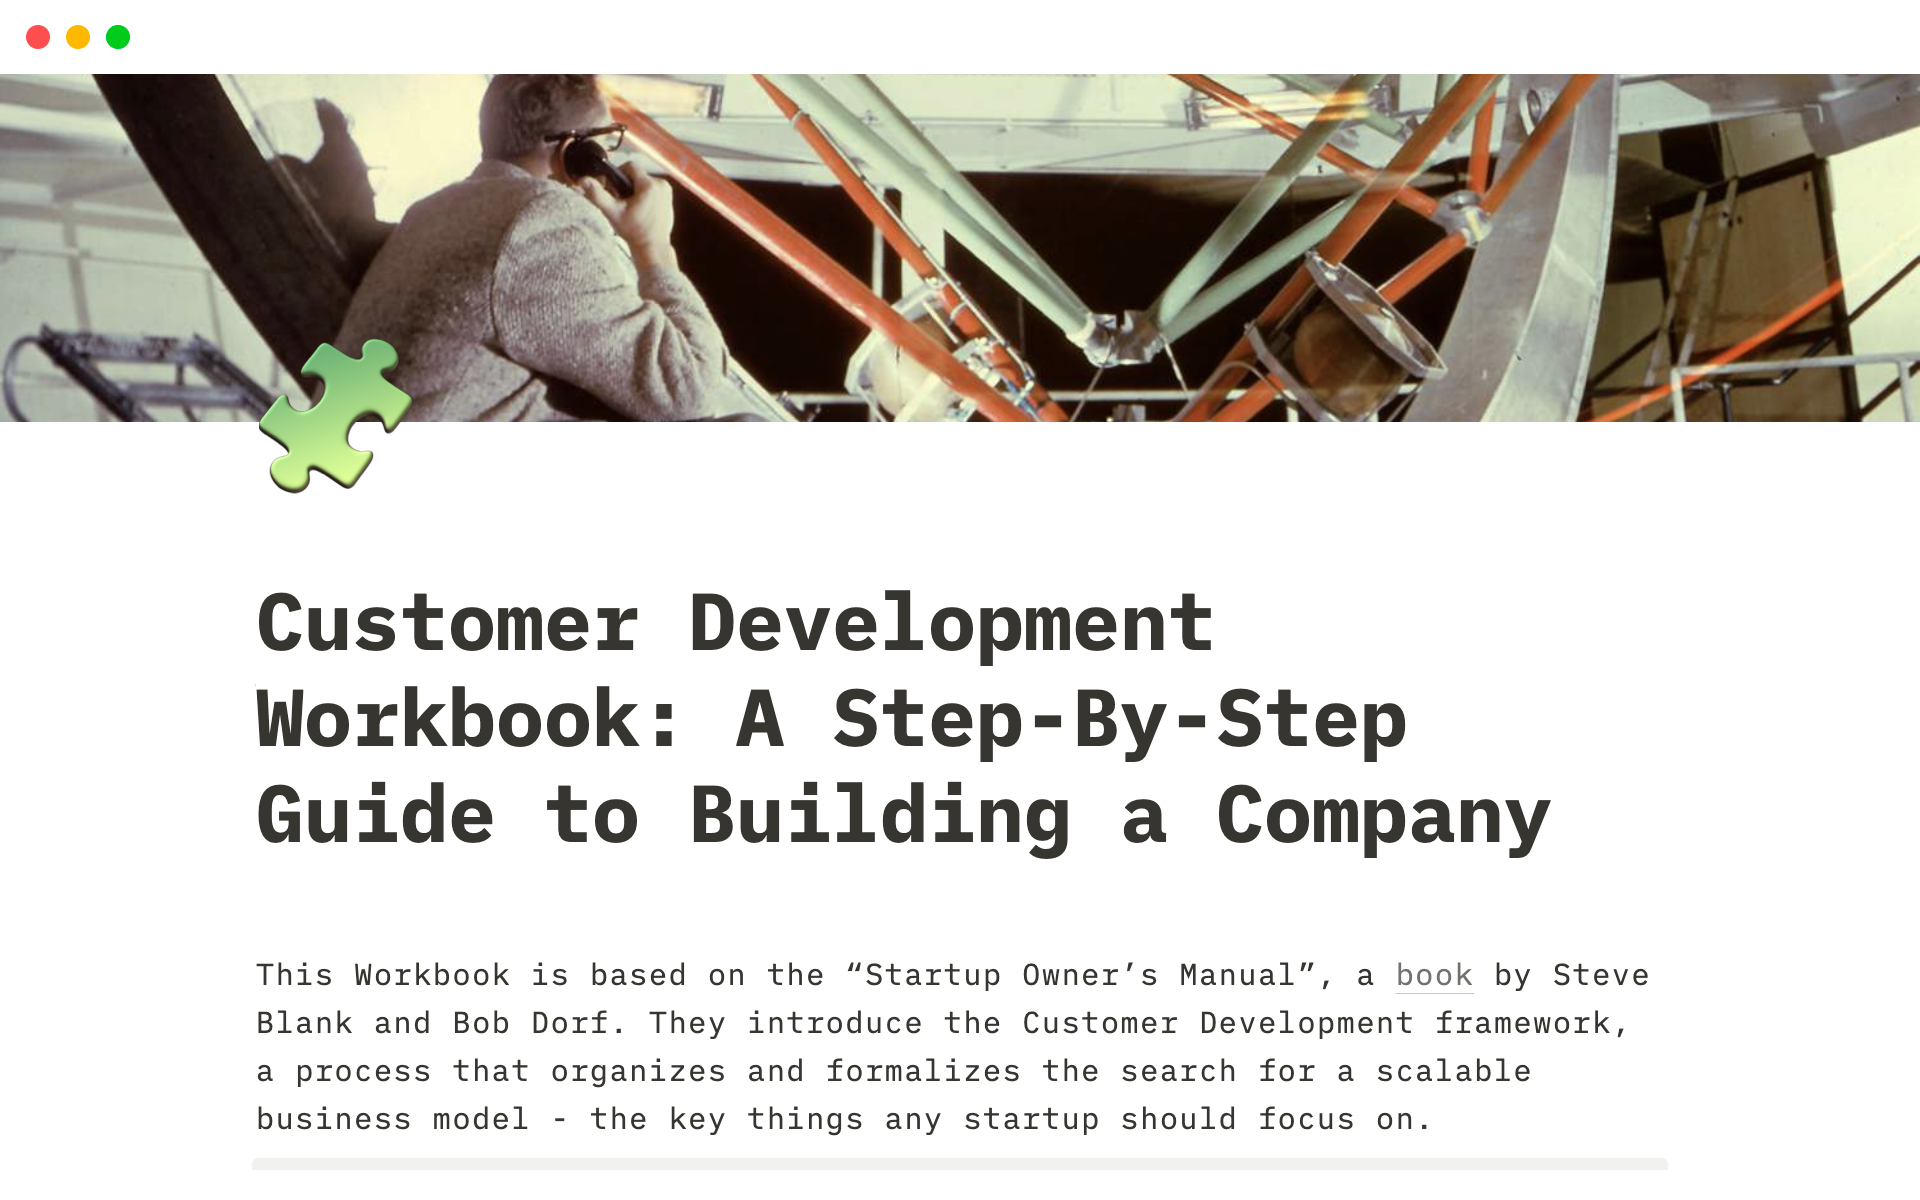 The Customer Development Workbook helps entrepreneurs validate and launch their projects.